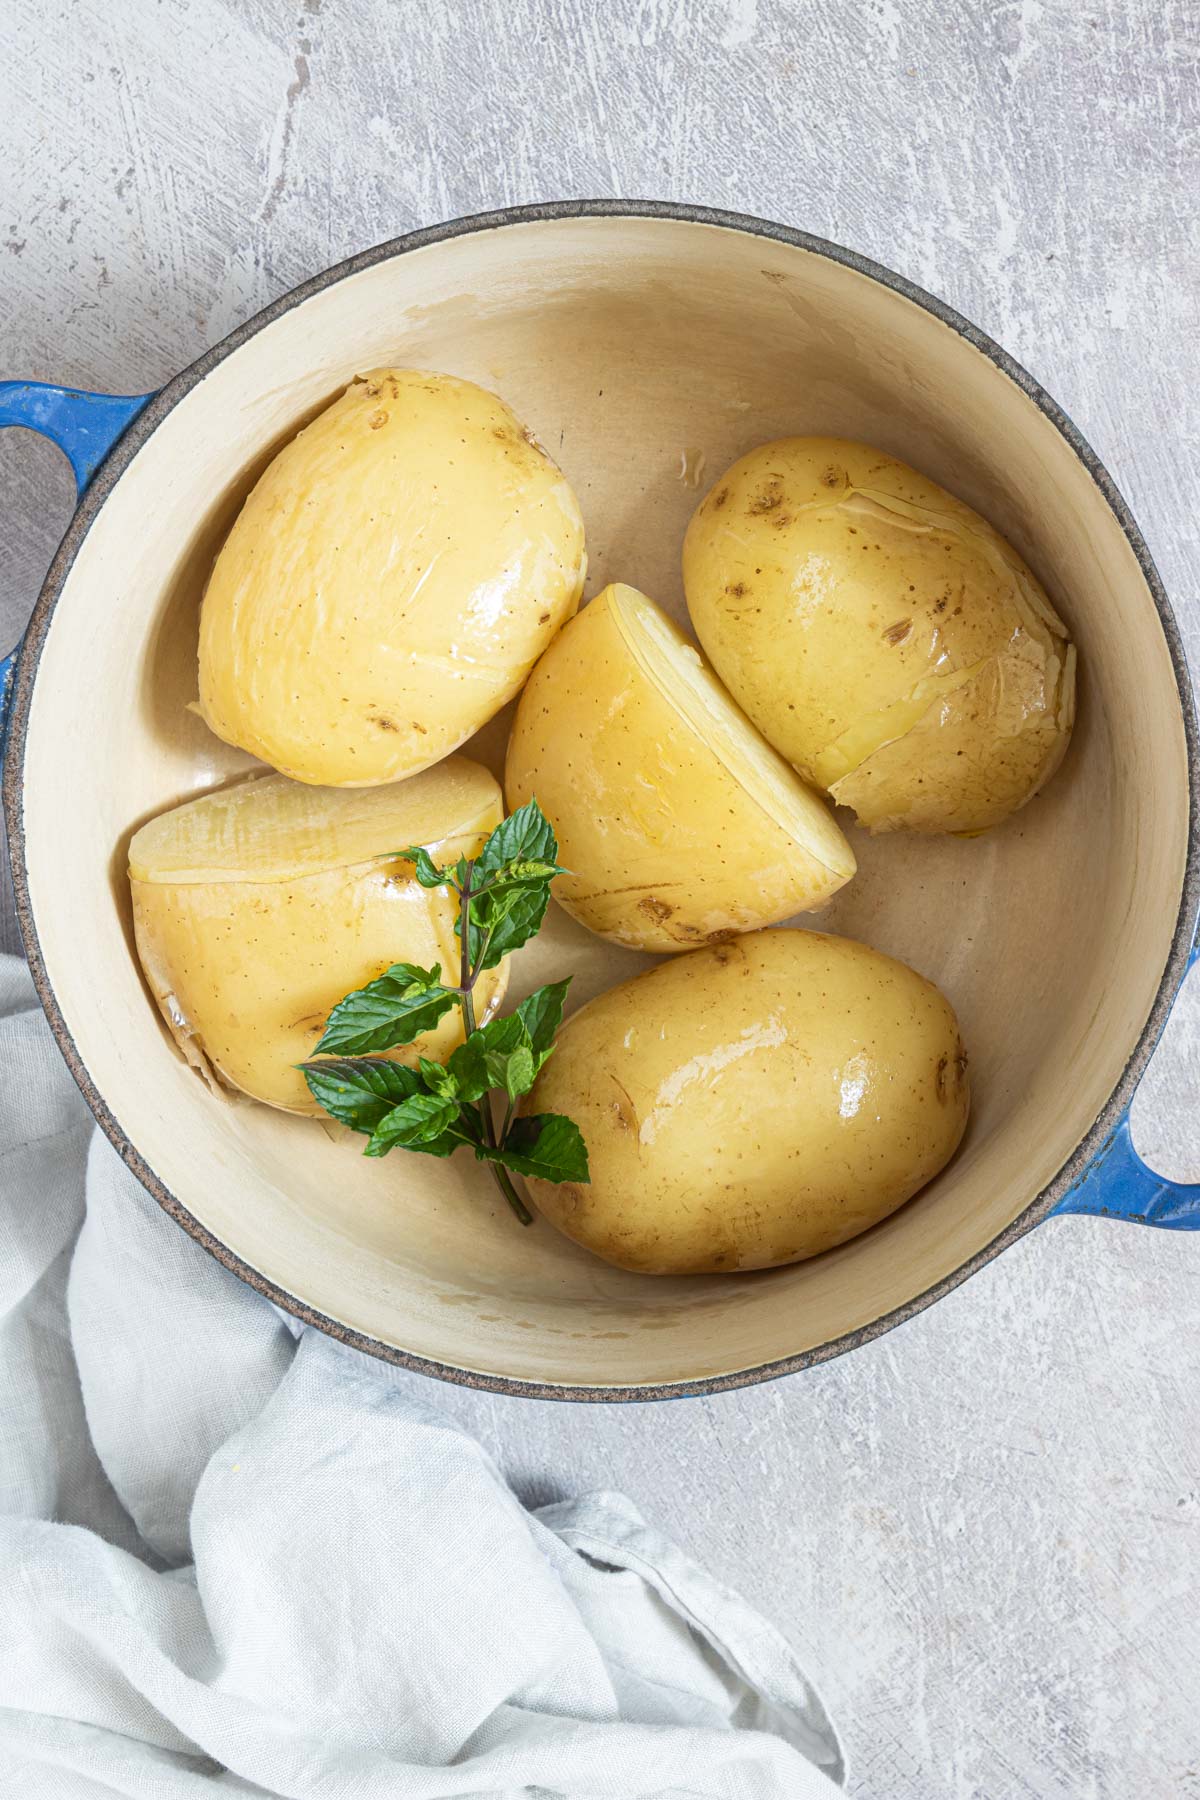 How To Boil Potatoes